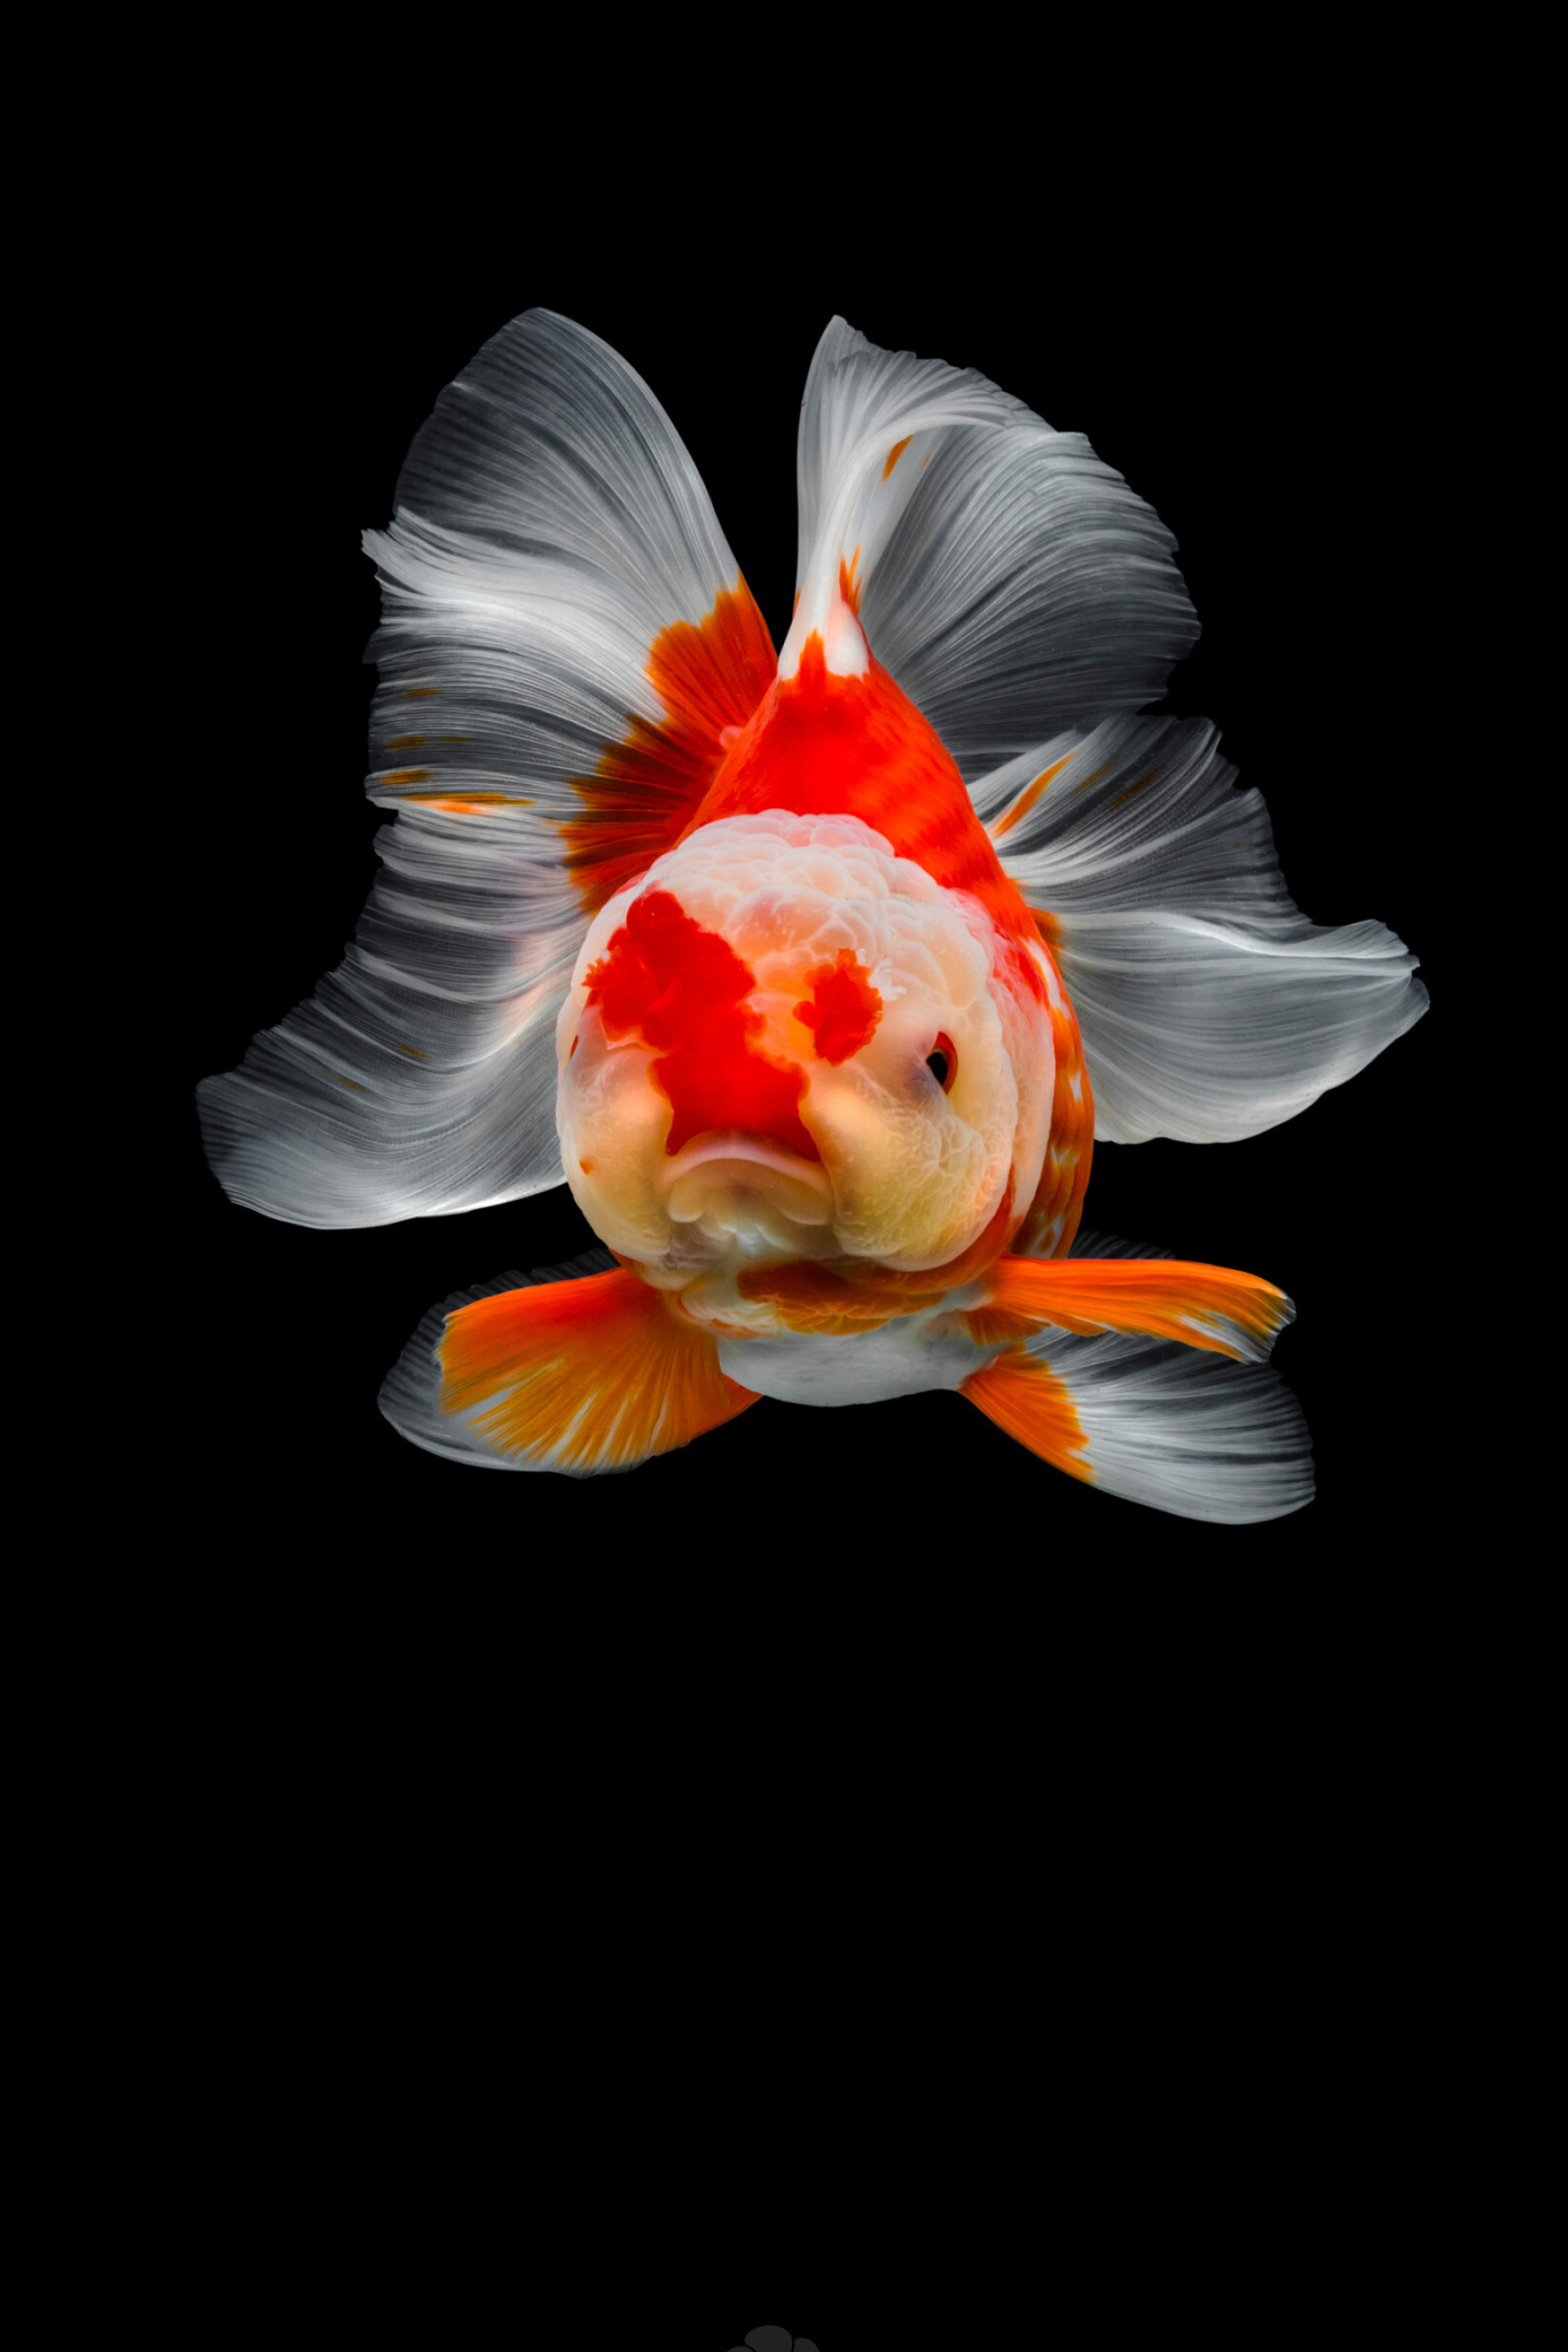 Koi Fish Images | Free HD Backgrounds, PNGs, Vectors & Illustrations -  rawpixel